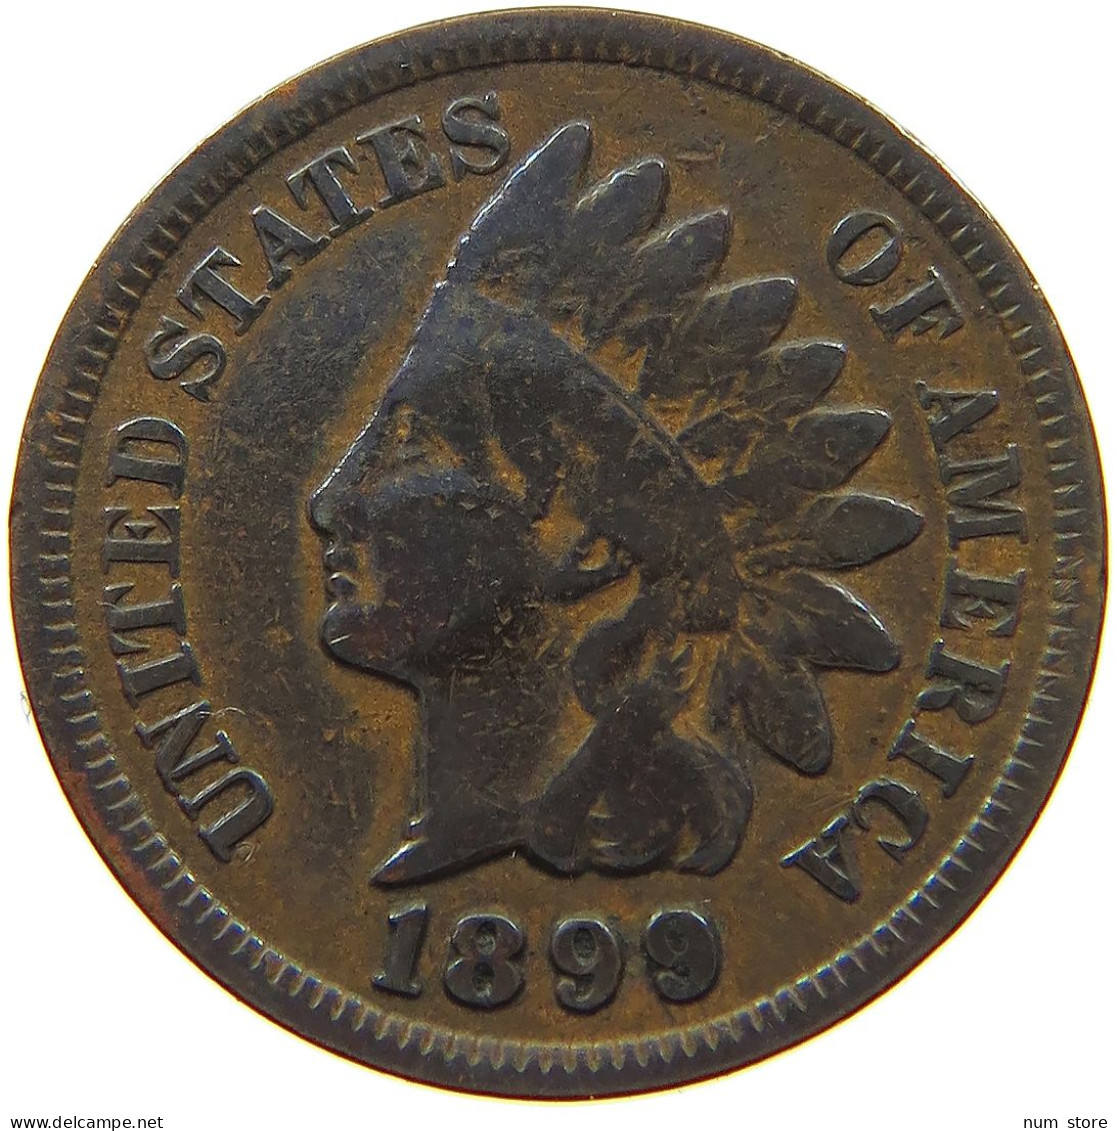 UNITED STATES OF AMERICA CENT 1899 INDIAN HEAD #s063 0025 - 1859-1909: Indian Head